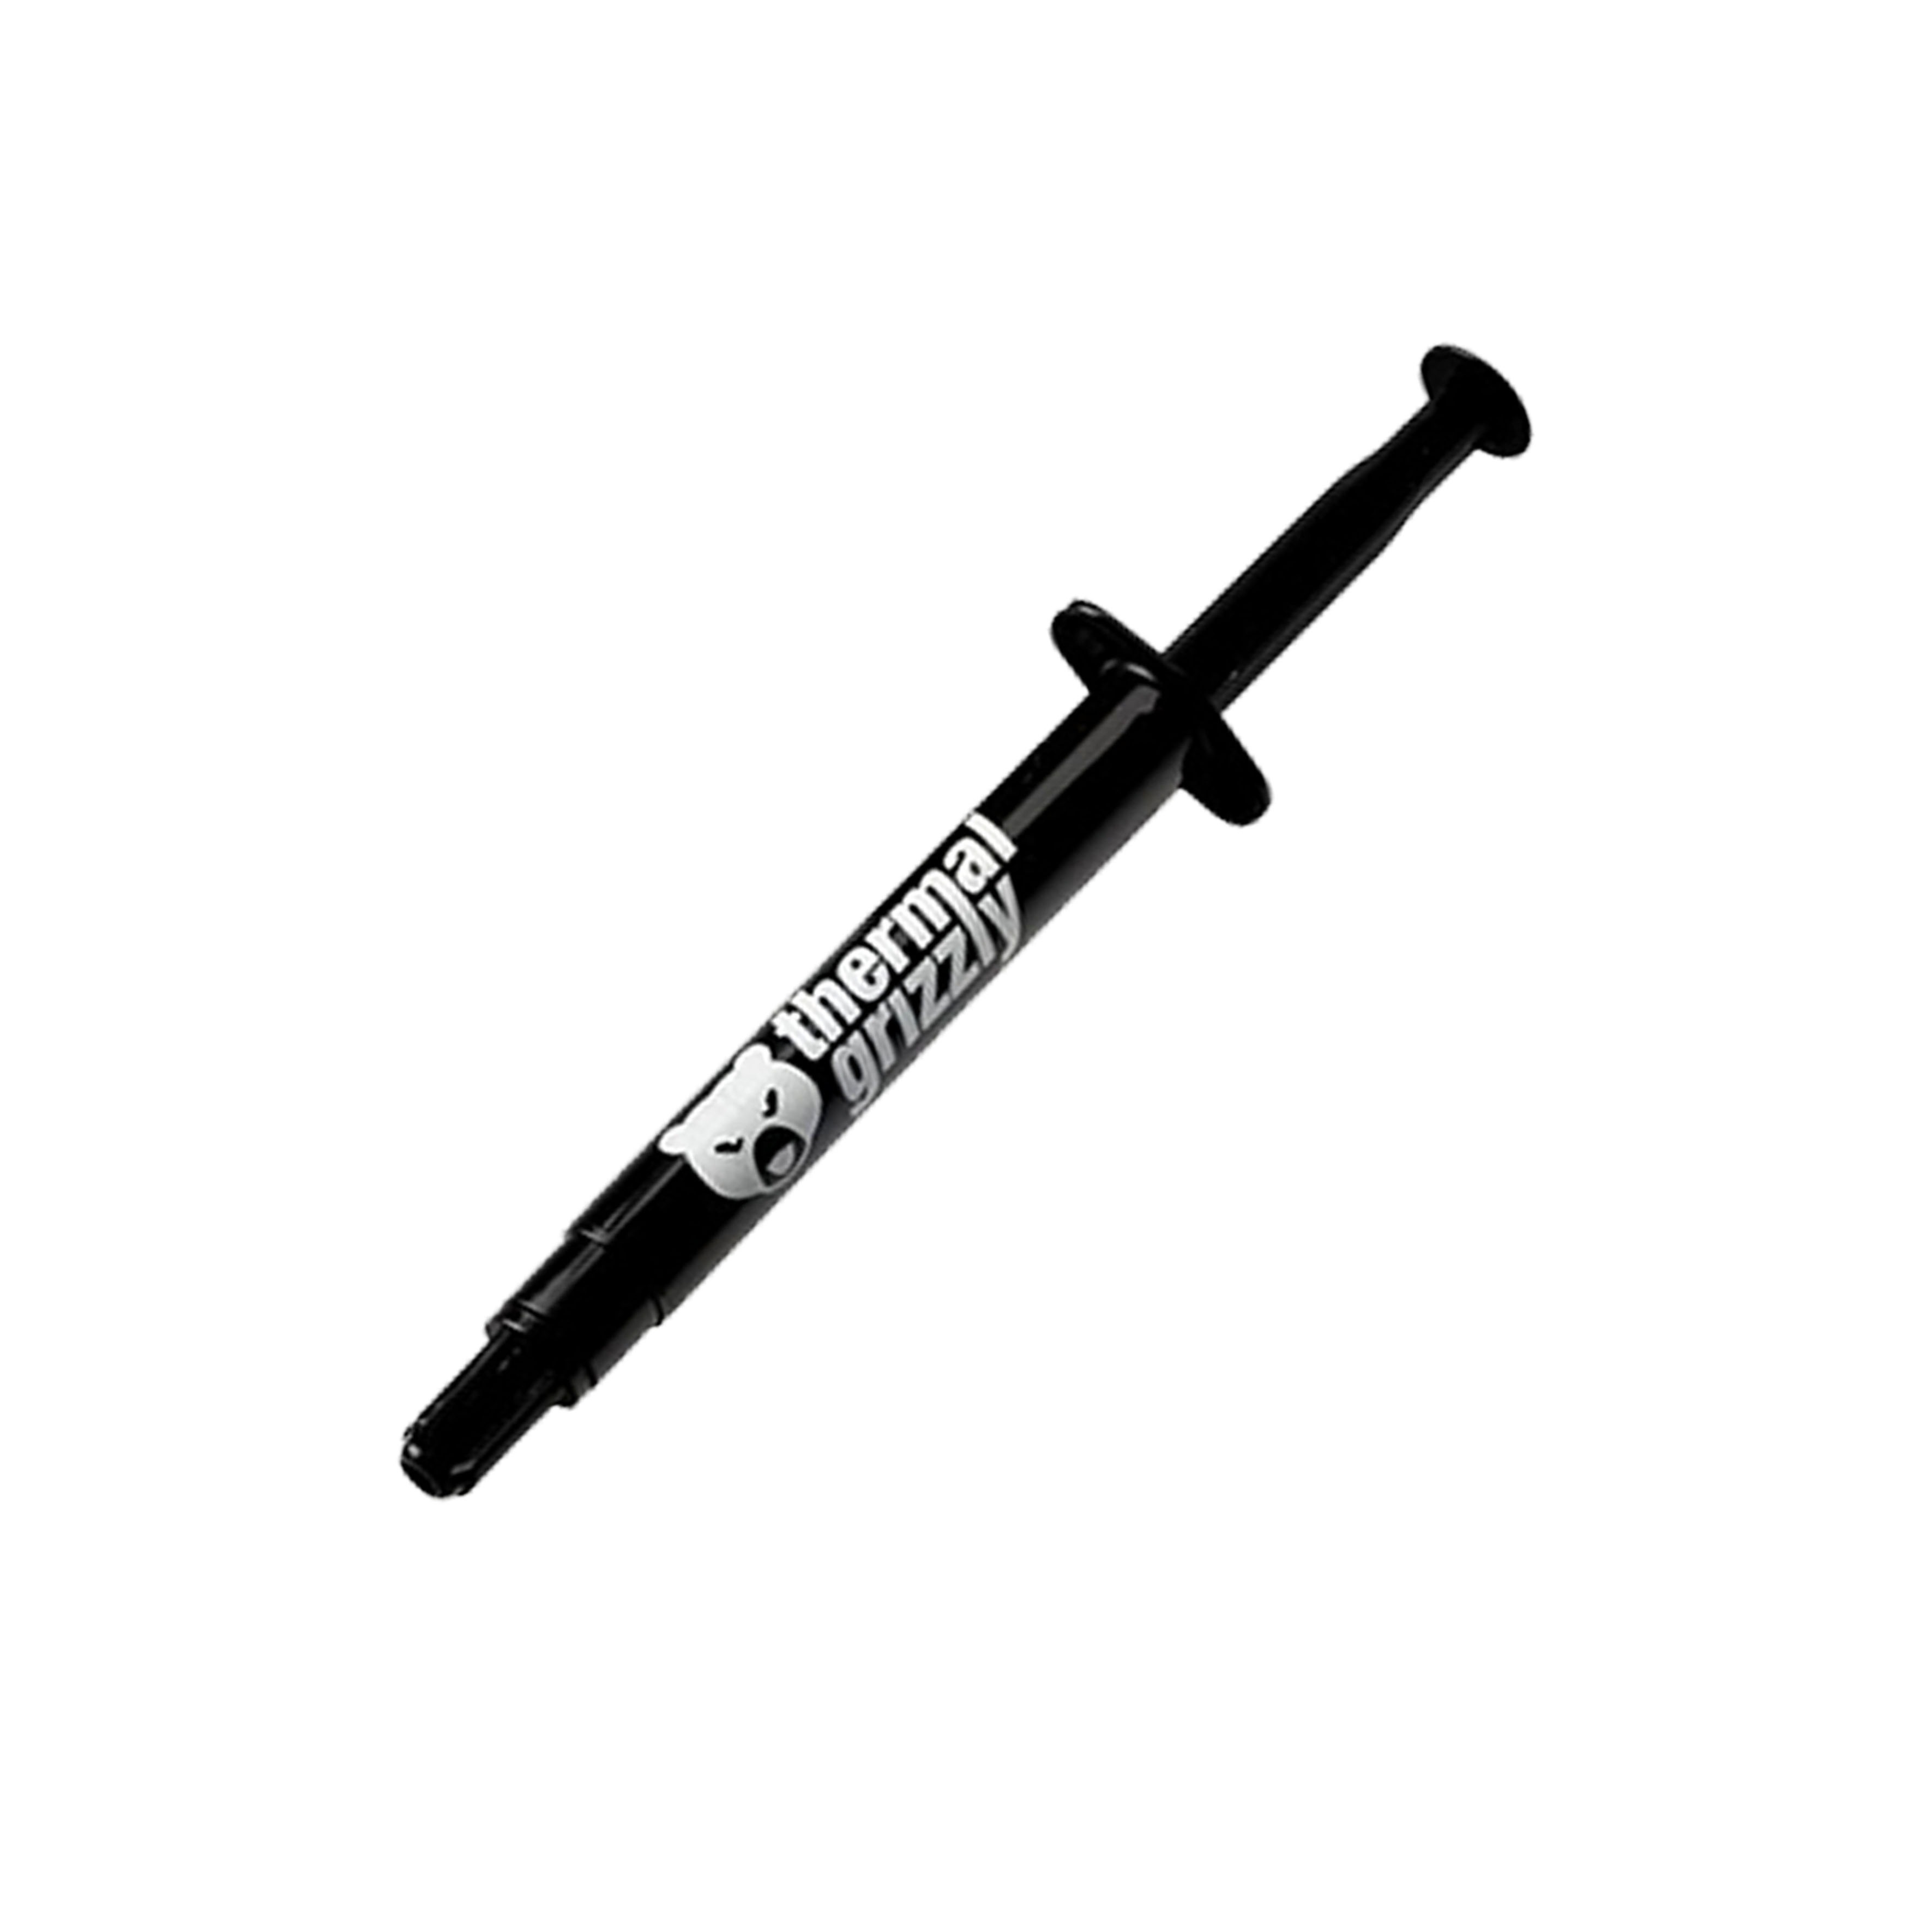 THERMAL GRIZZLY HYDRONAUT (3.9g / 1.5ml) THERMAL PASTE - TG-H-015-R